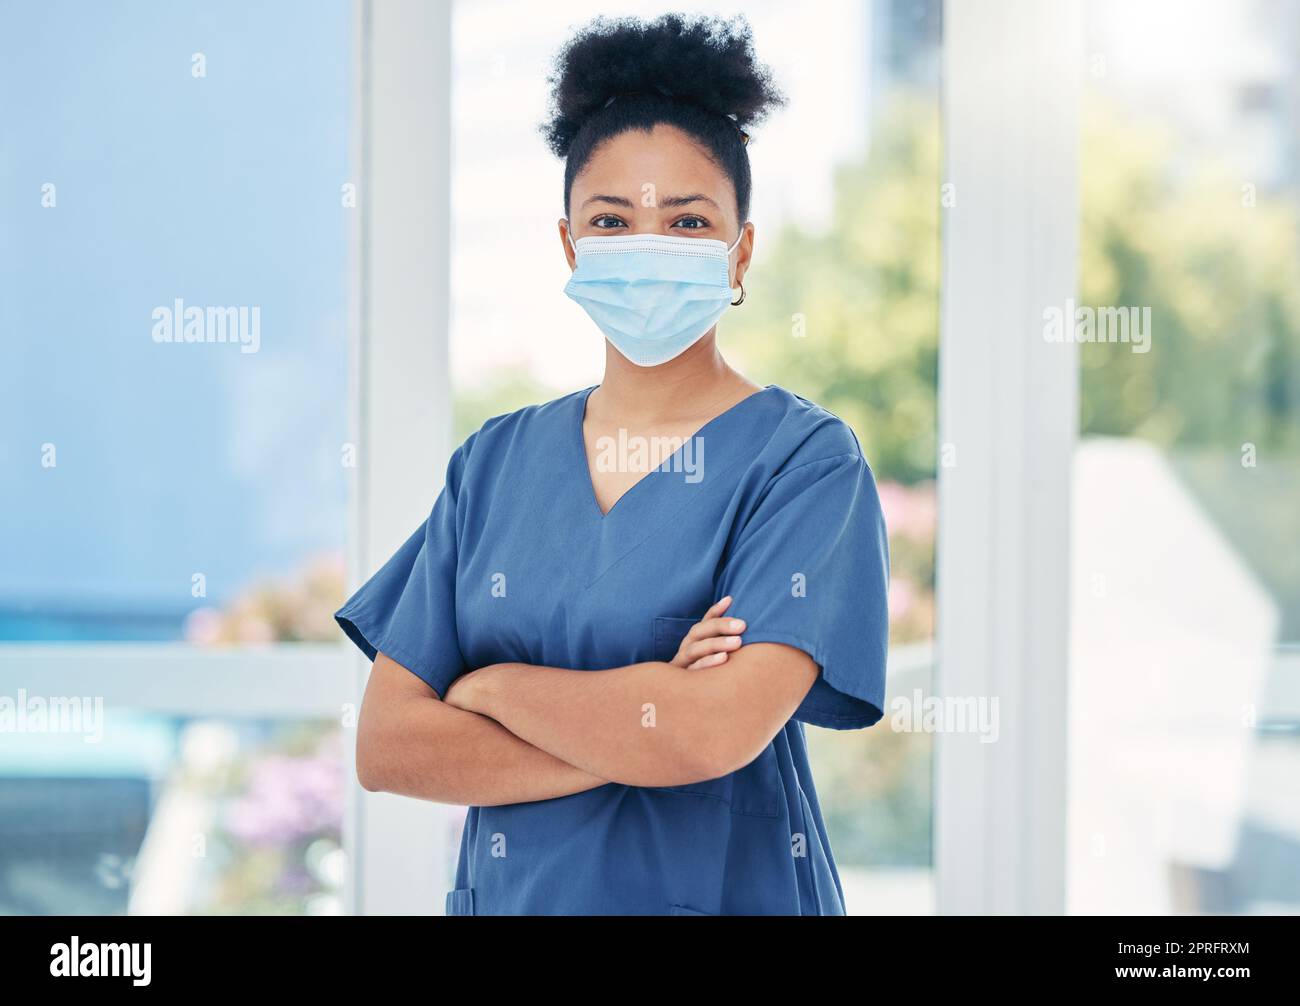 Nurse, healthcare black woman with a covid face mask in confident portrait. Innovation, leadership and proud medical nursing professional, surgeon or health employee with vision for success in career Stock Photo